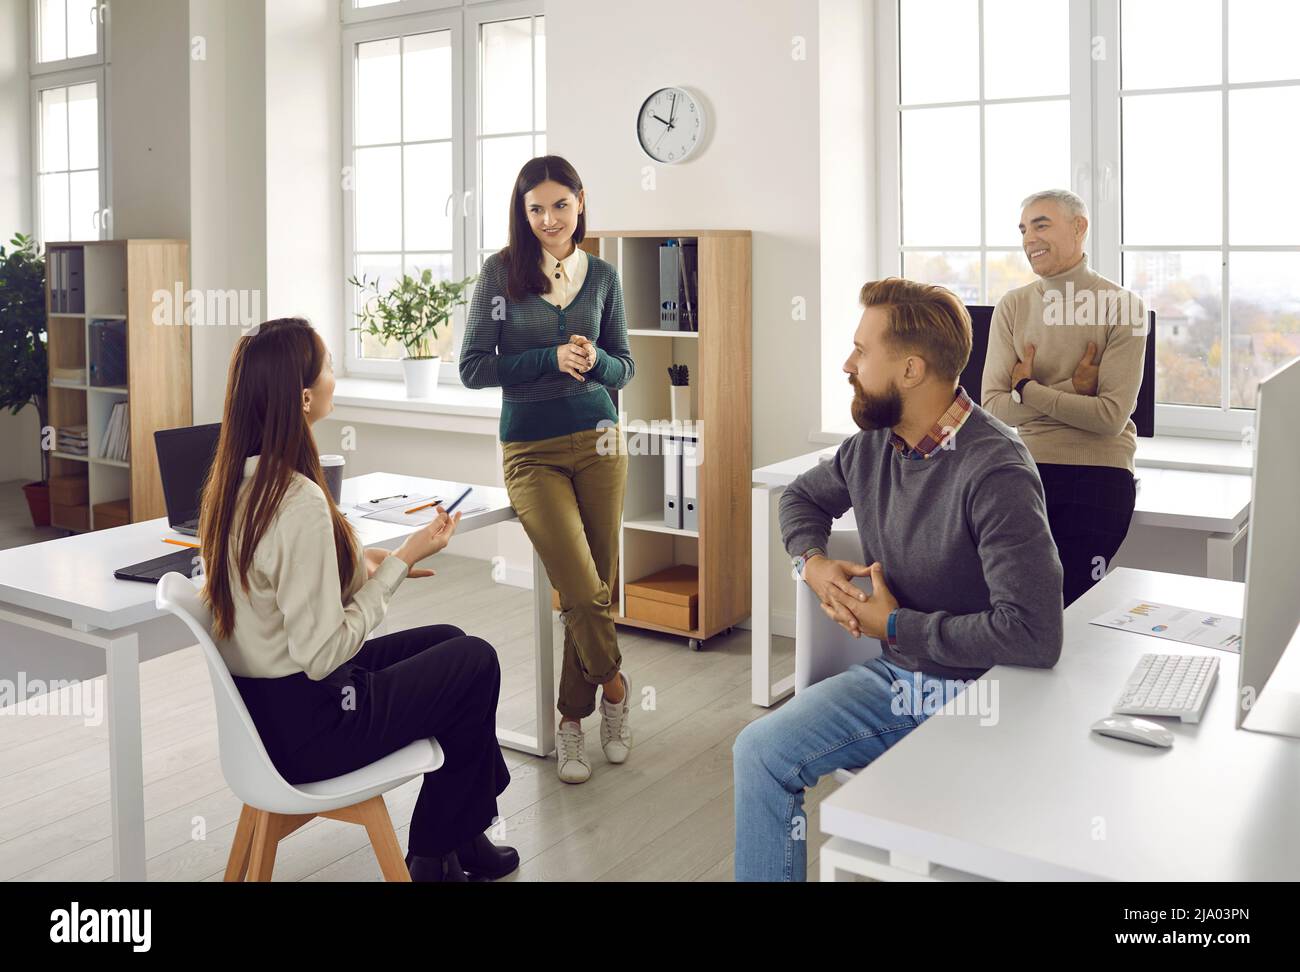 Group of office workers who communicate or talk to each other during informal working conversation. Stock Photo